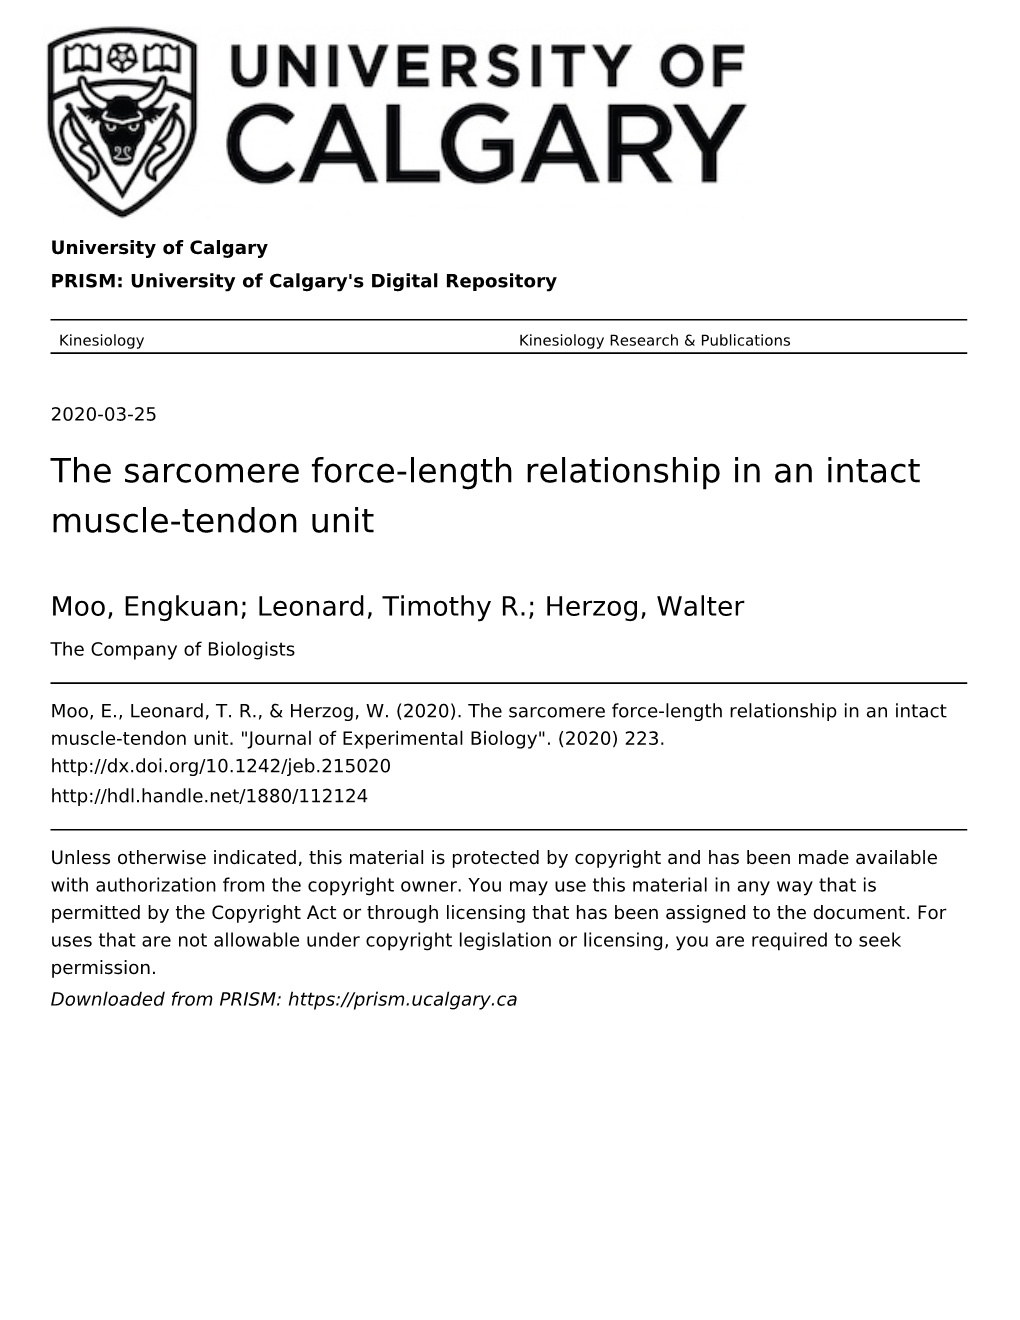 The Sarcomere Force-Length Relationship in an Intact Muscle-Tendon Unit